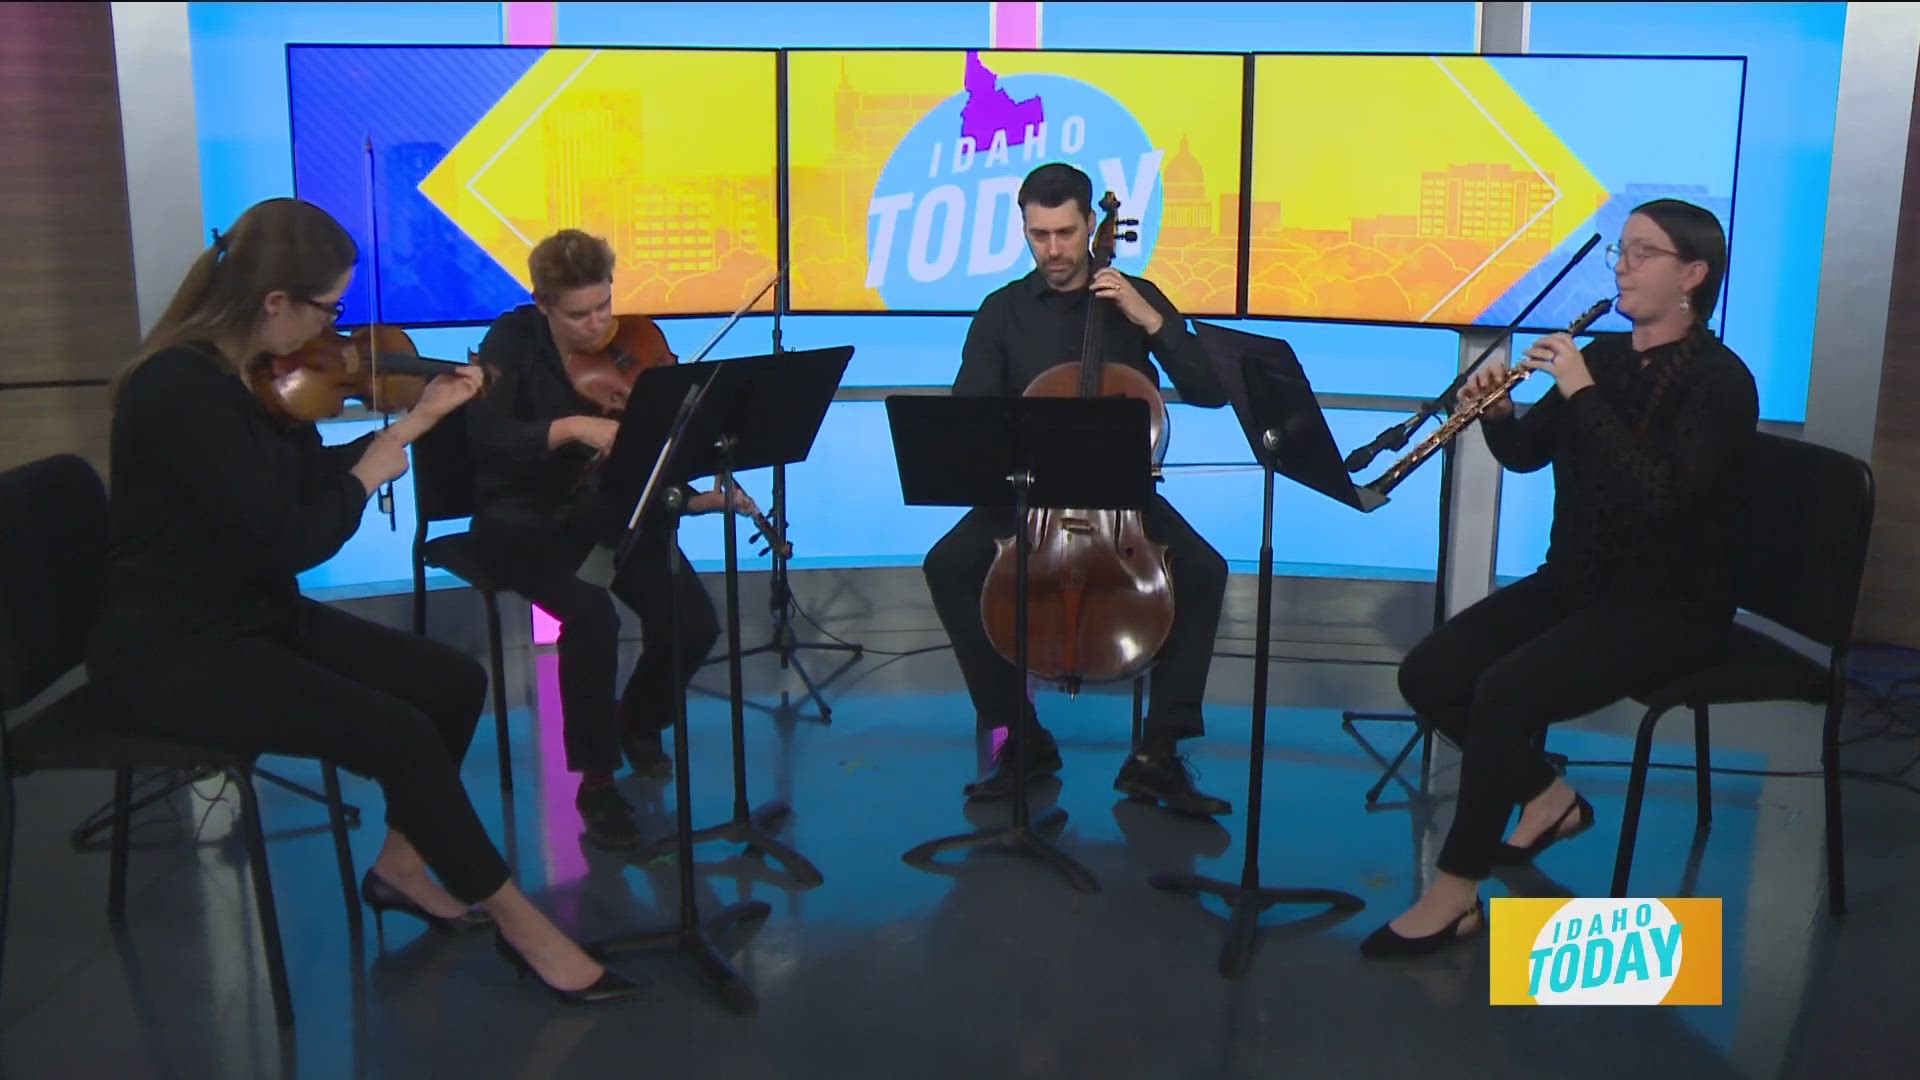 The Boise Baroque Orchestra performs in the Idaho Today studio!